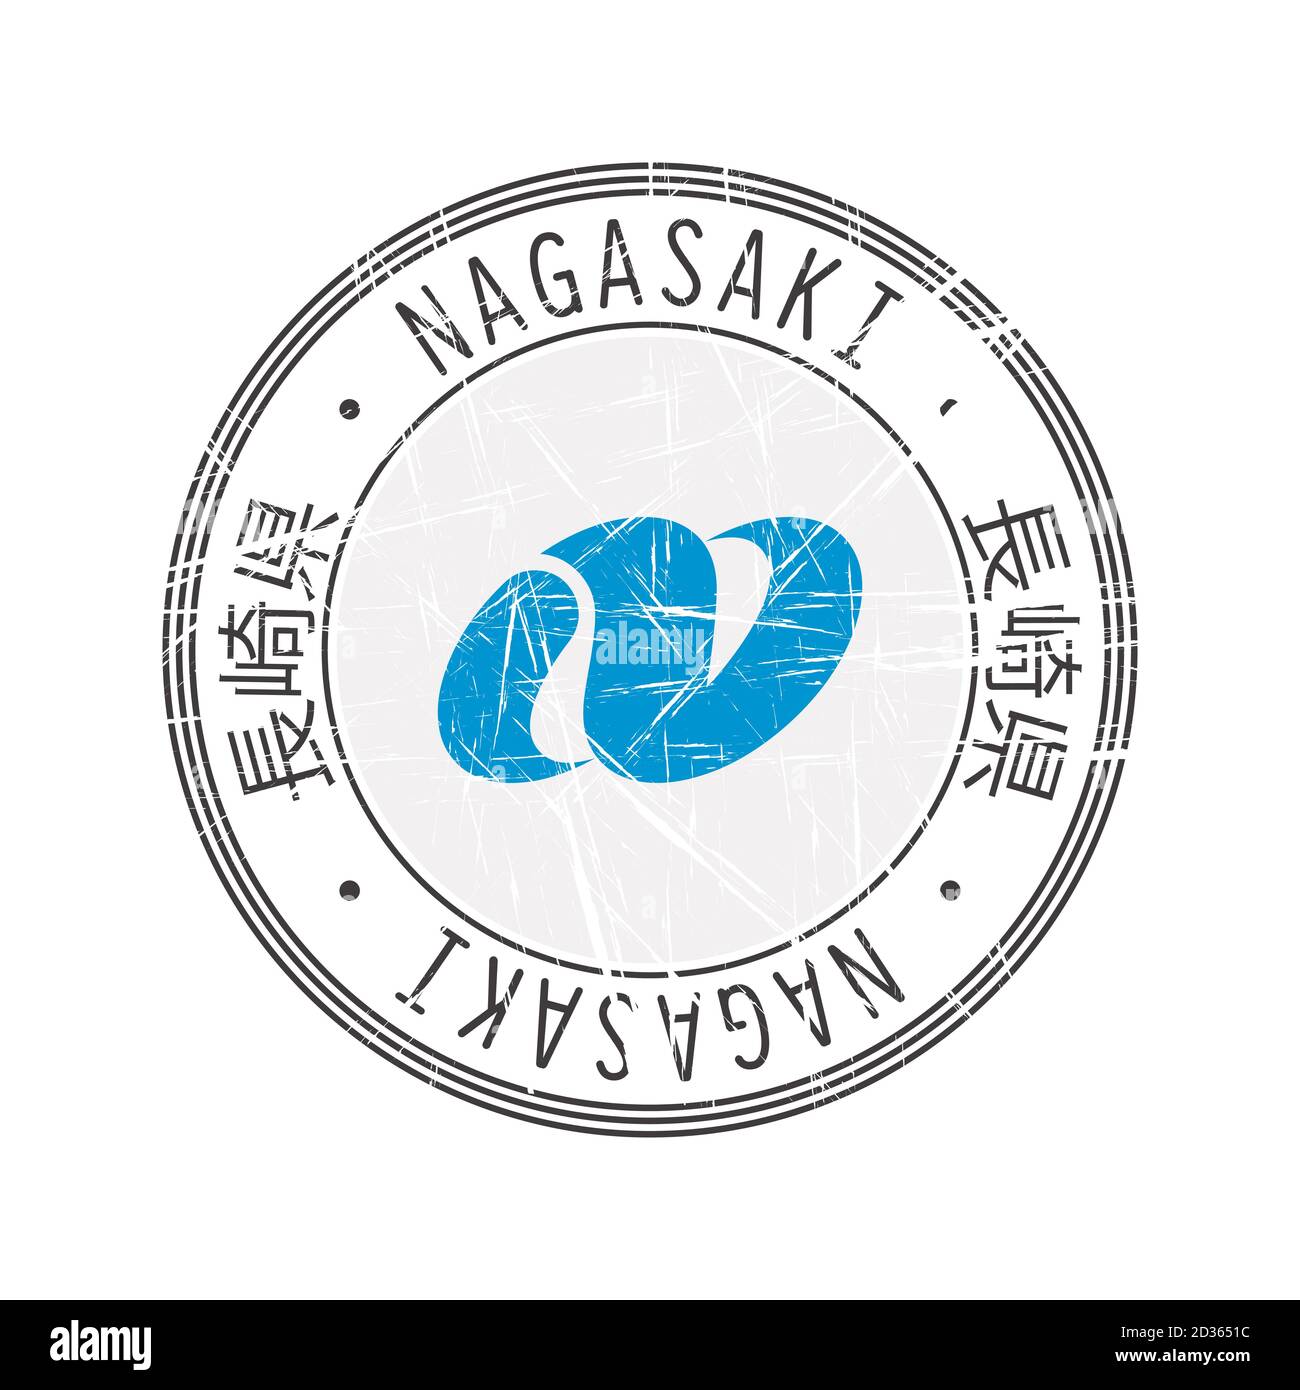 Nagasaki Prefecture, Japan. Vector rubber stamp over white background Stock Vector